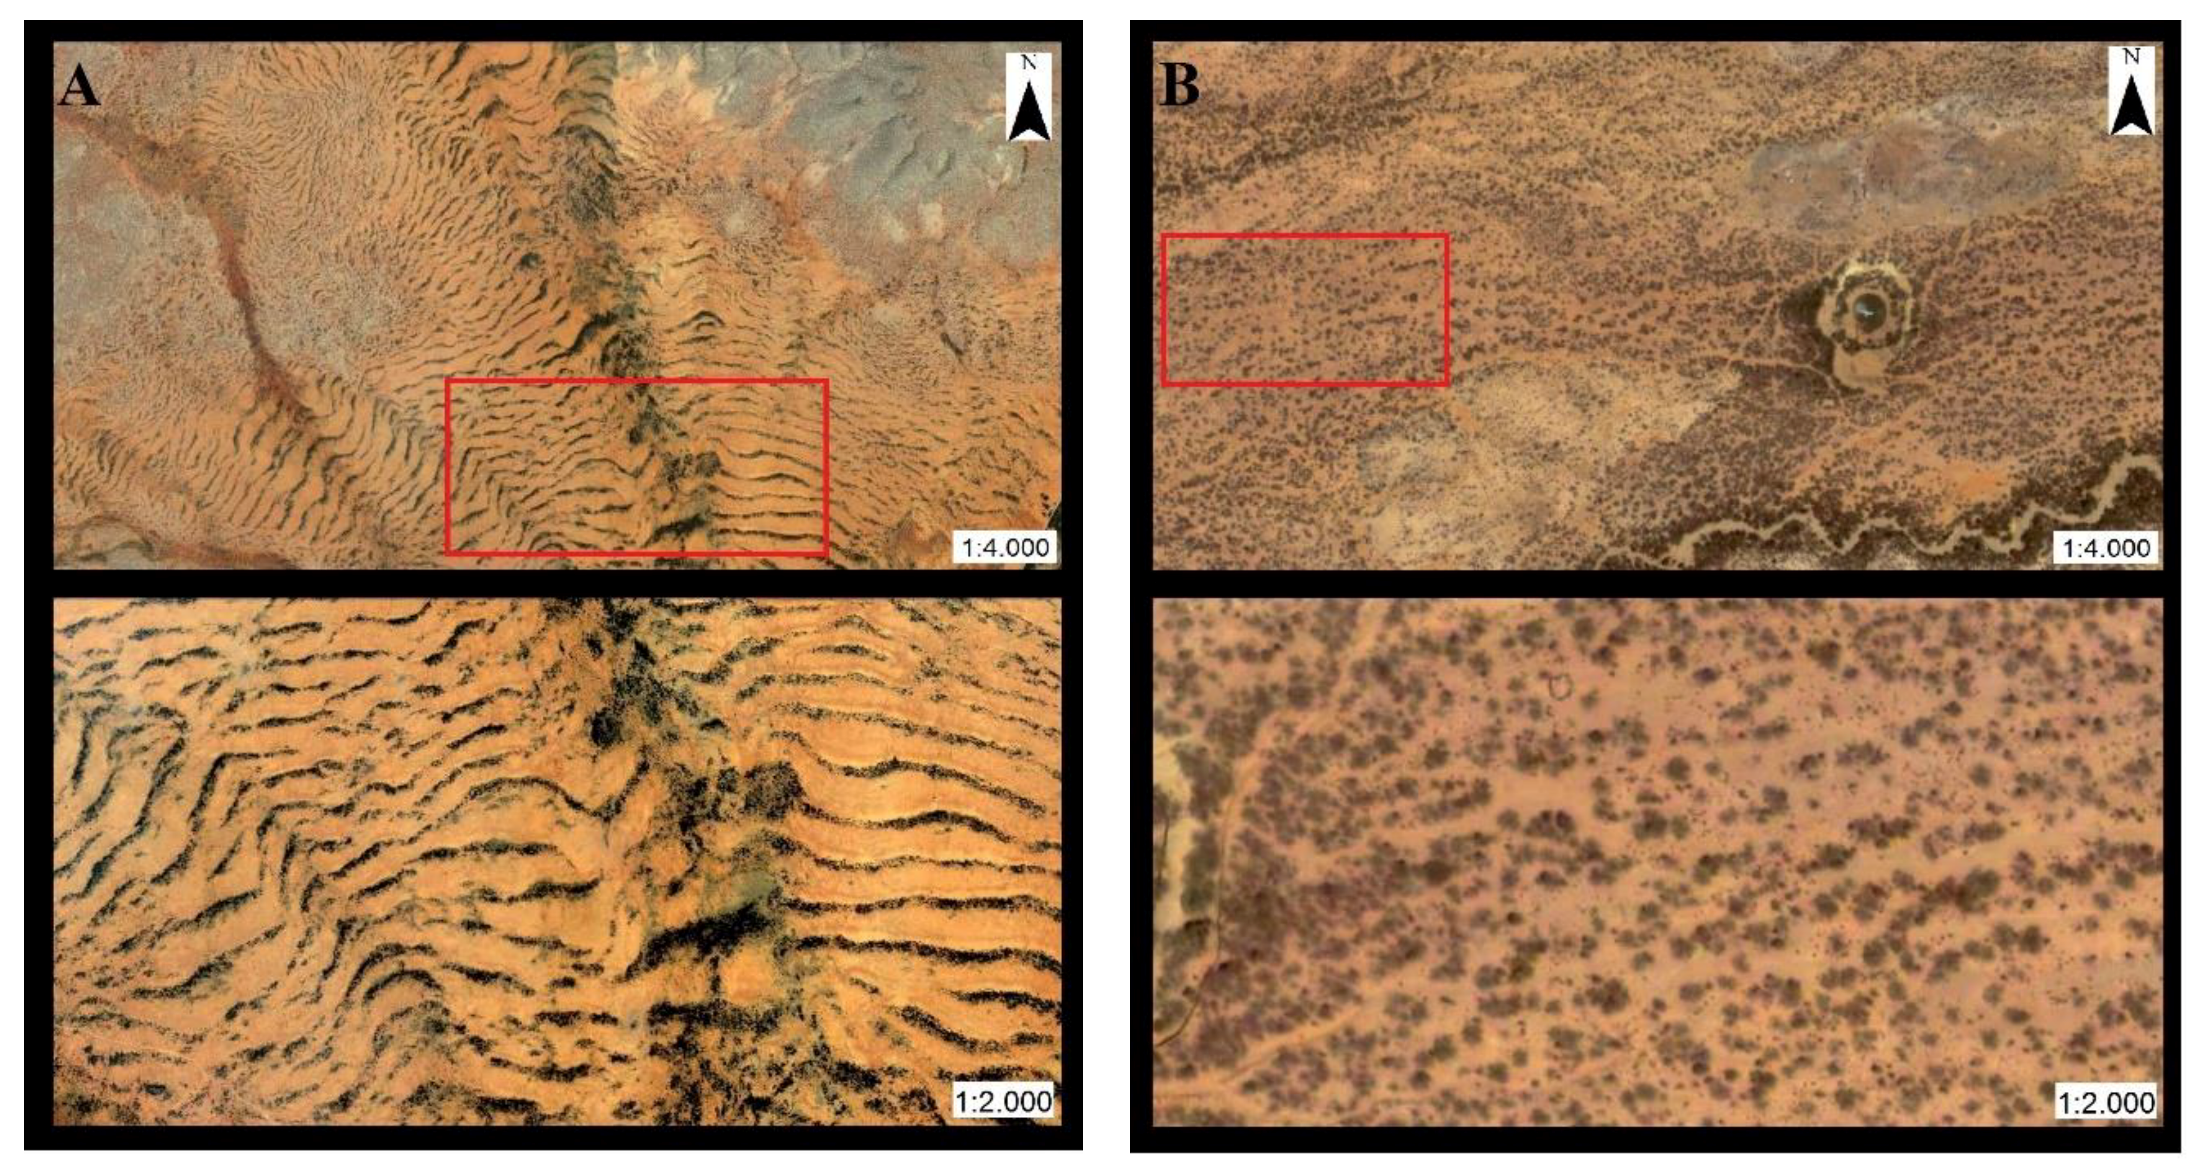 Geosciences | Free Full-Text | The Use of High-Resolution Historical Images  to Analyse the Leopard Pattern in the Arid Area of La Alta Guajira, Colombia